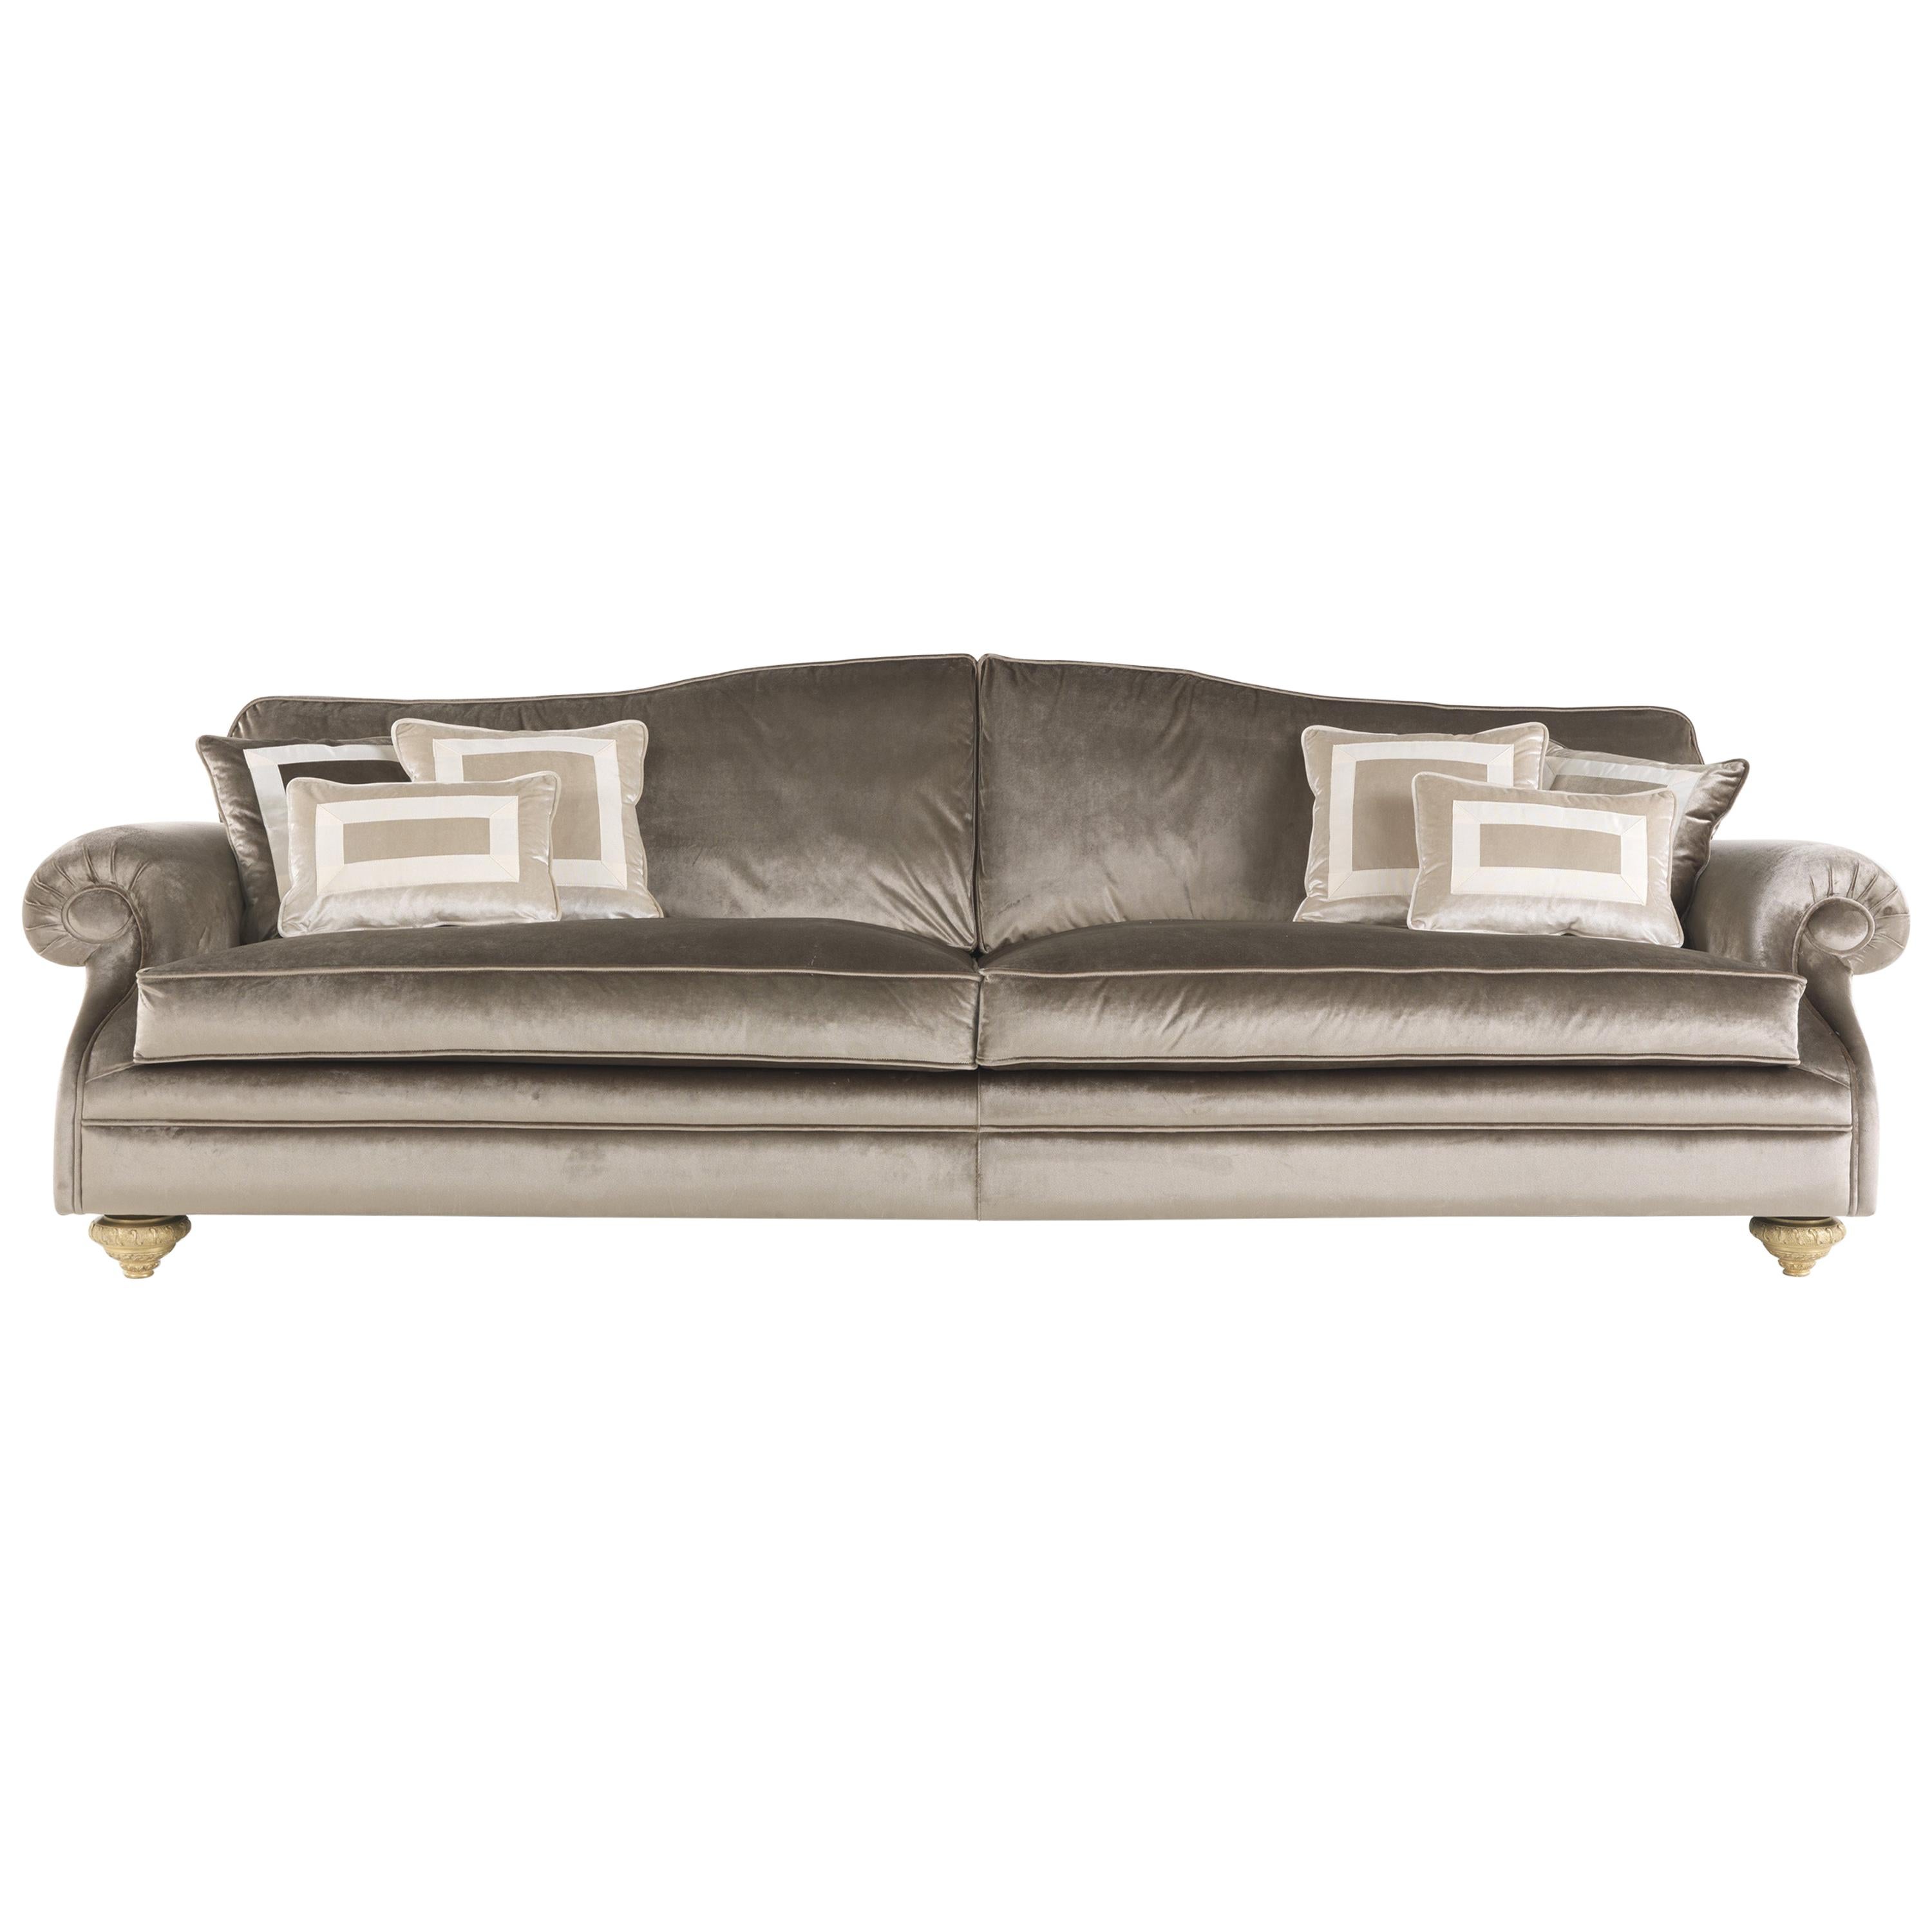 21st Century Beluga 3-Seater Sofa in Fabric and Legs in Hand-carved Wood